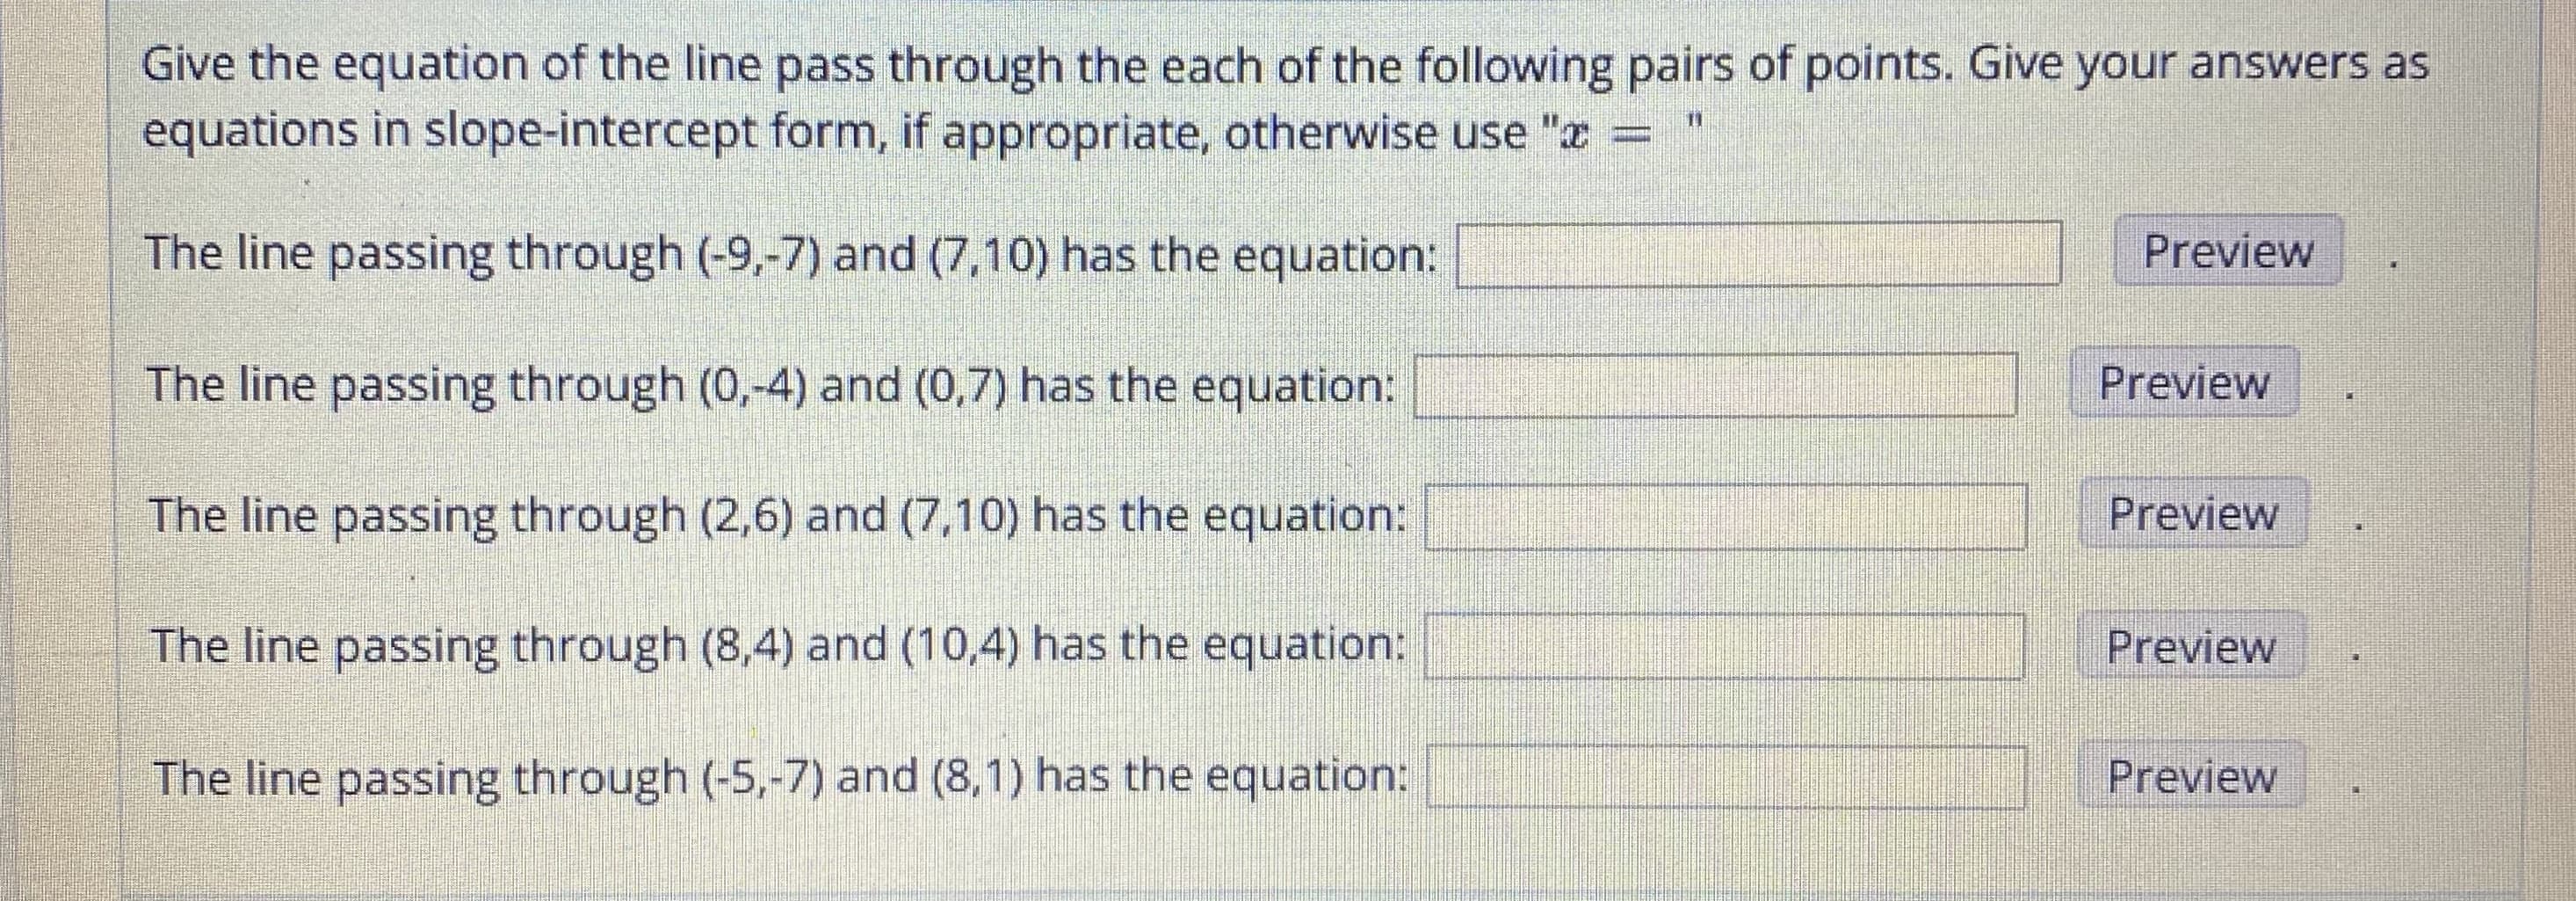 Give the equation of the line pass through the each of the following pairs of points. Give your answers as
equations in slope-intercept form, if appropriate, otherwise use "a
The line passing through (-9,-7) and (7,10) has the equation:
Preview
The line passing through (0,-4) and (0,7) has the equation:
Preview
Preview
The line passing through (2,6) and (7,10) has the equation:
The line passing through (8,4) and (10,4) has the equation:
Preview
The line passing through (-5,-7) and (8,1) has the equation:
Preview
